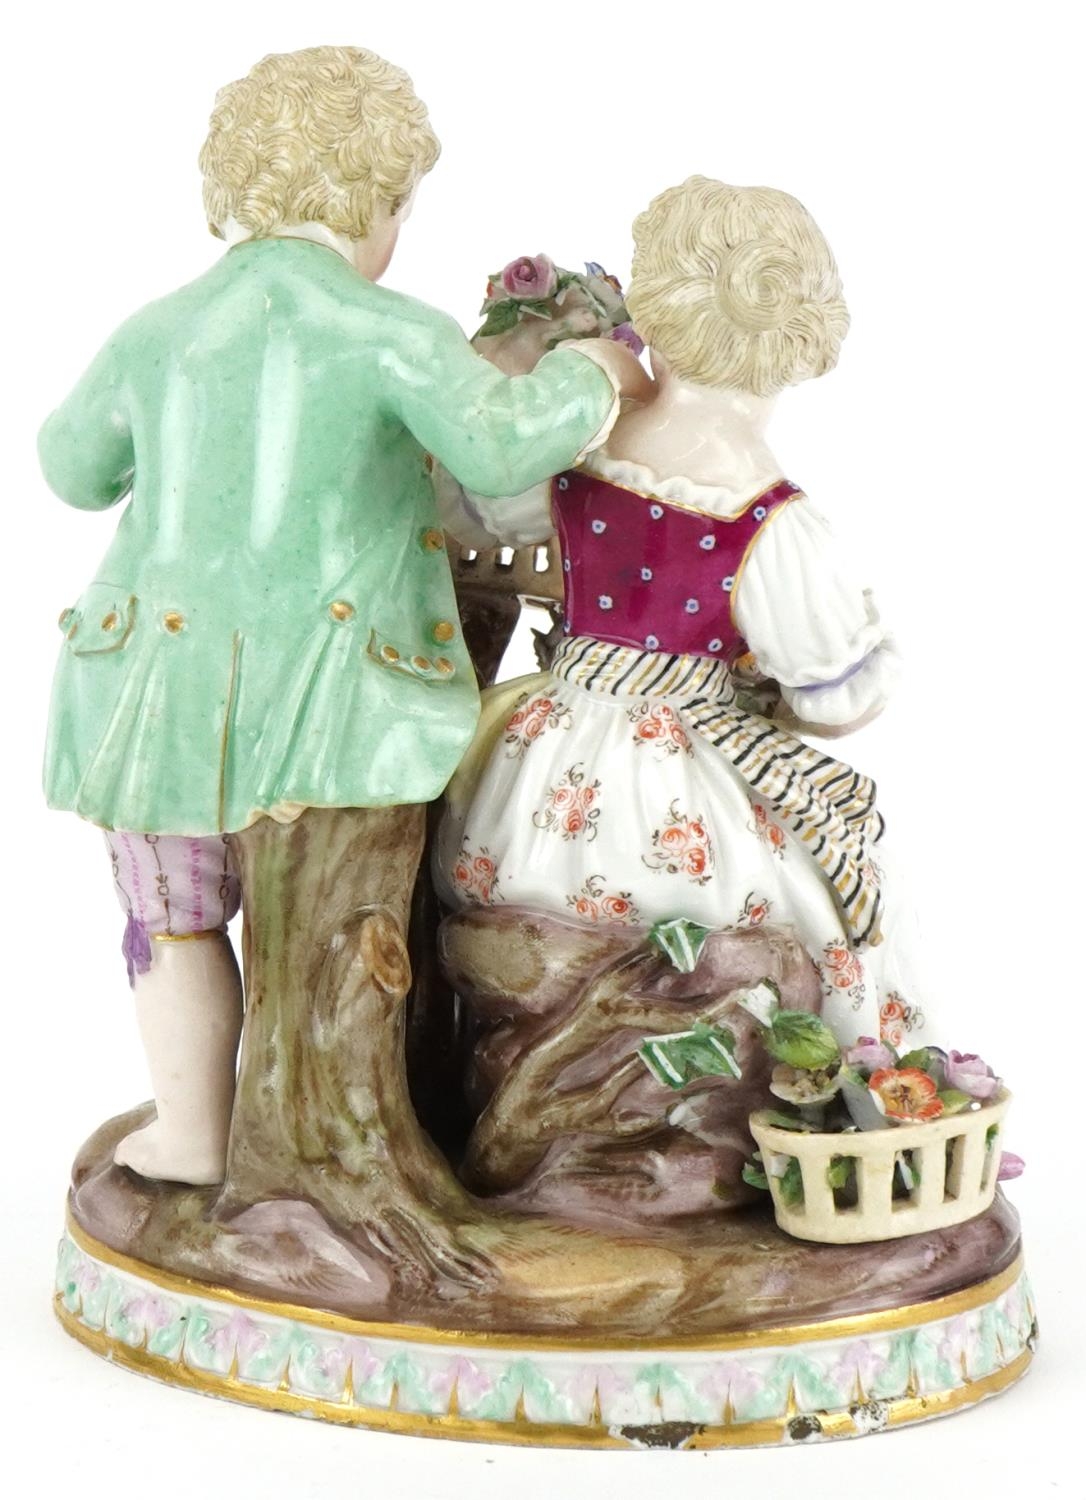 Hand painted Meissen porcelain figure group of a boy, girl with bird cage, blue crossed swords - Image 2 of 3